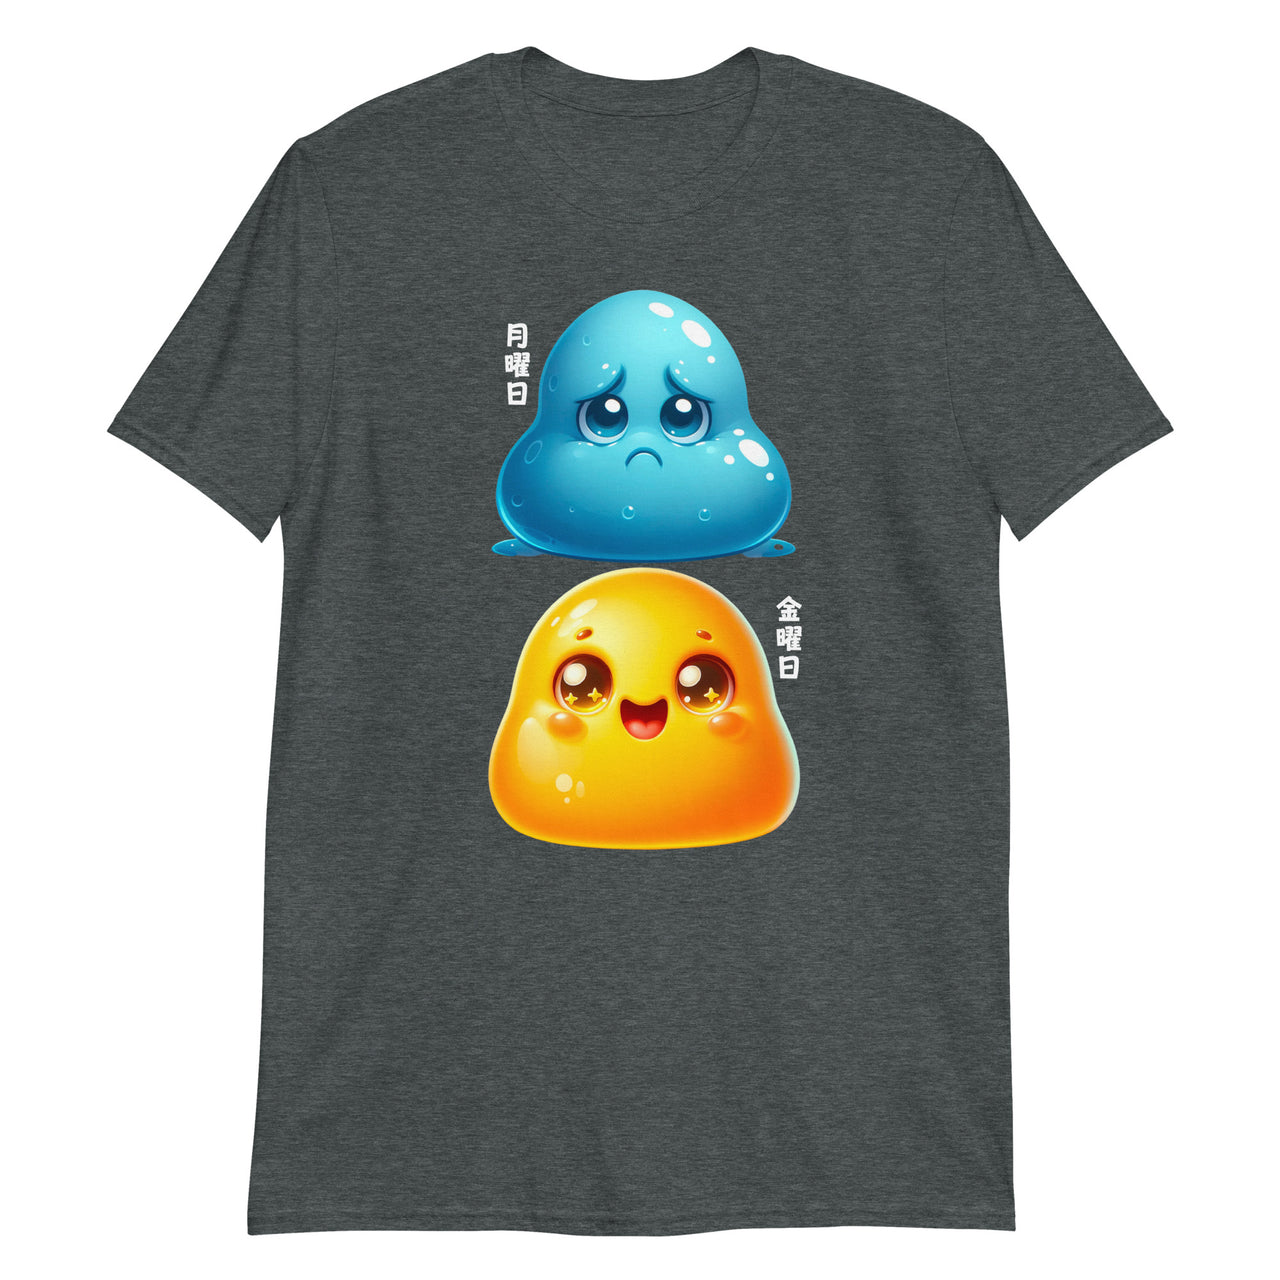 Monday and Friday a Japanese Comparison T-Shirt